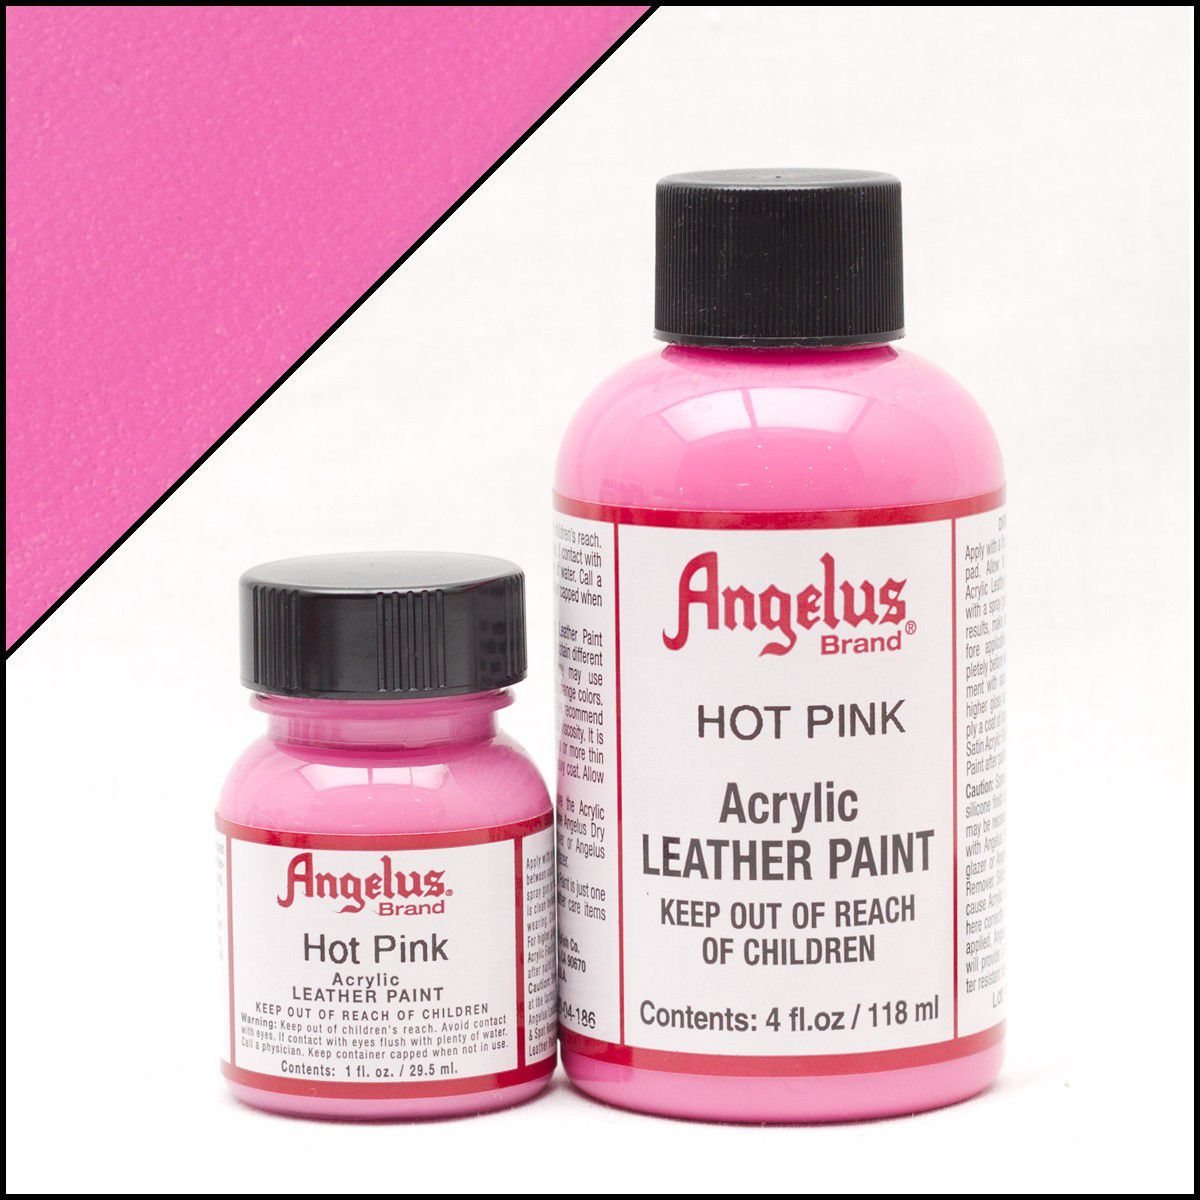 Angelus Leather Paint Hot Pink, Hot Pink Leather